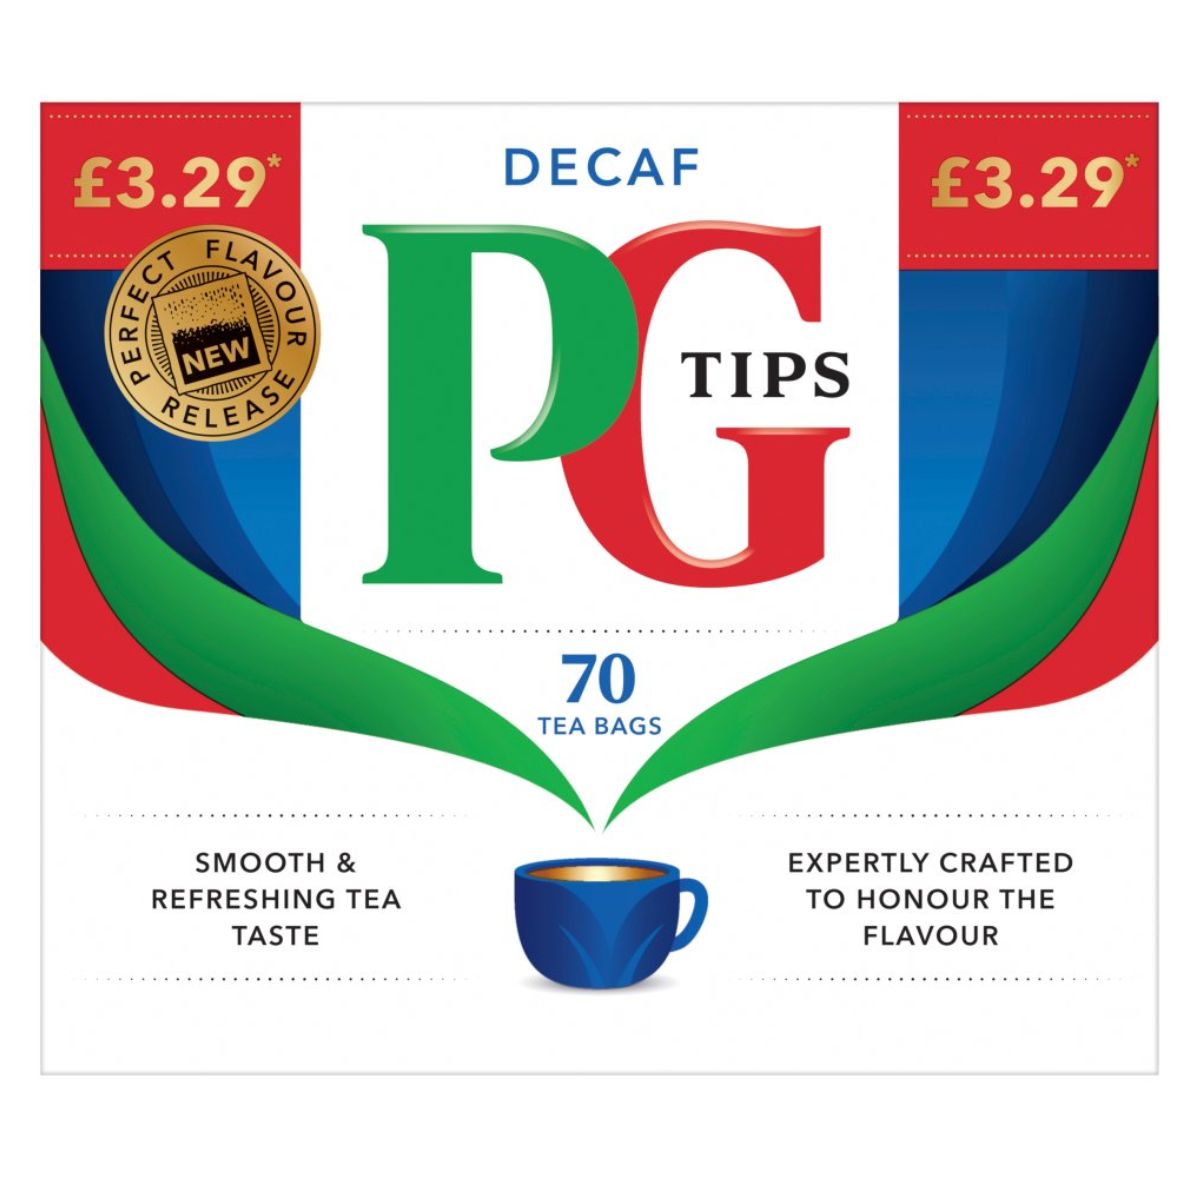 Packaging for PG Tips - 70 Decaf Tea Bags - 203g featuring a logo, a blue tea cup, price tags (£3.29), and text highlighting 70 tea bags and flavor qualities.